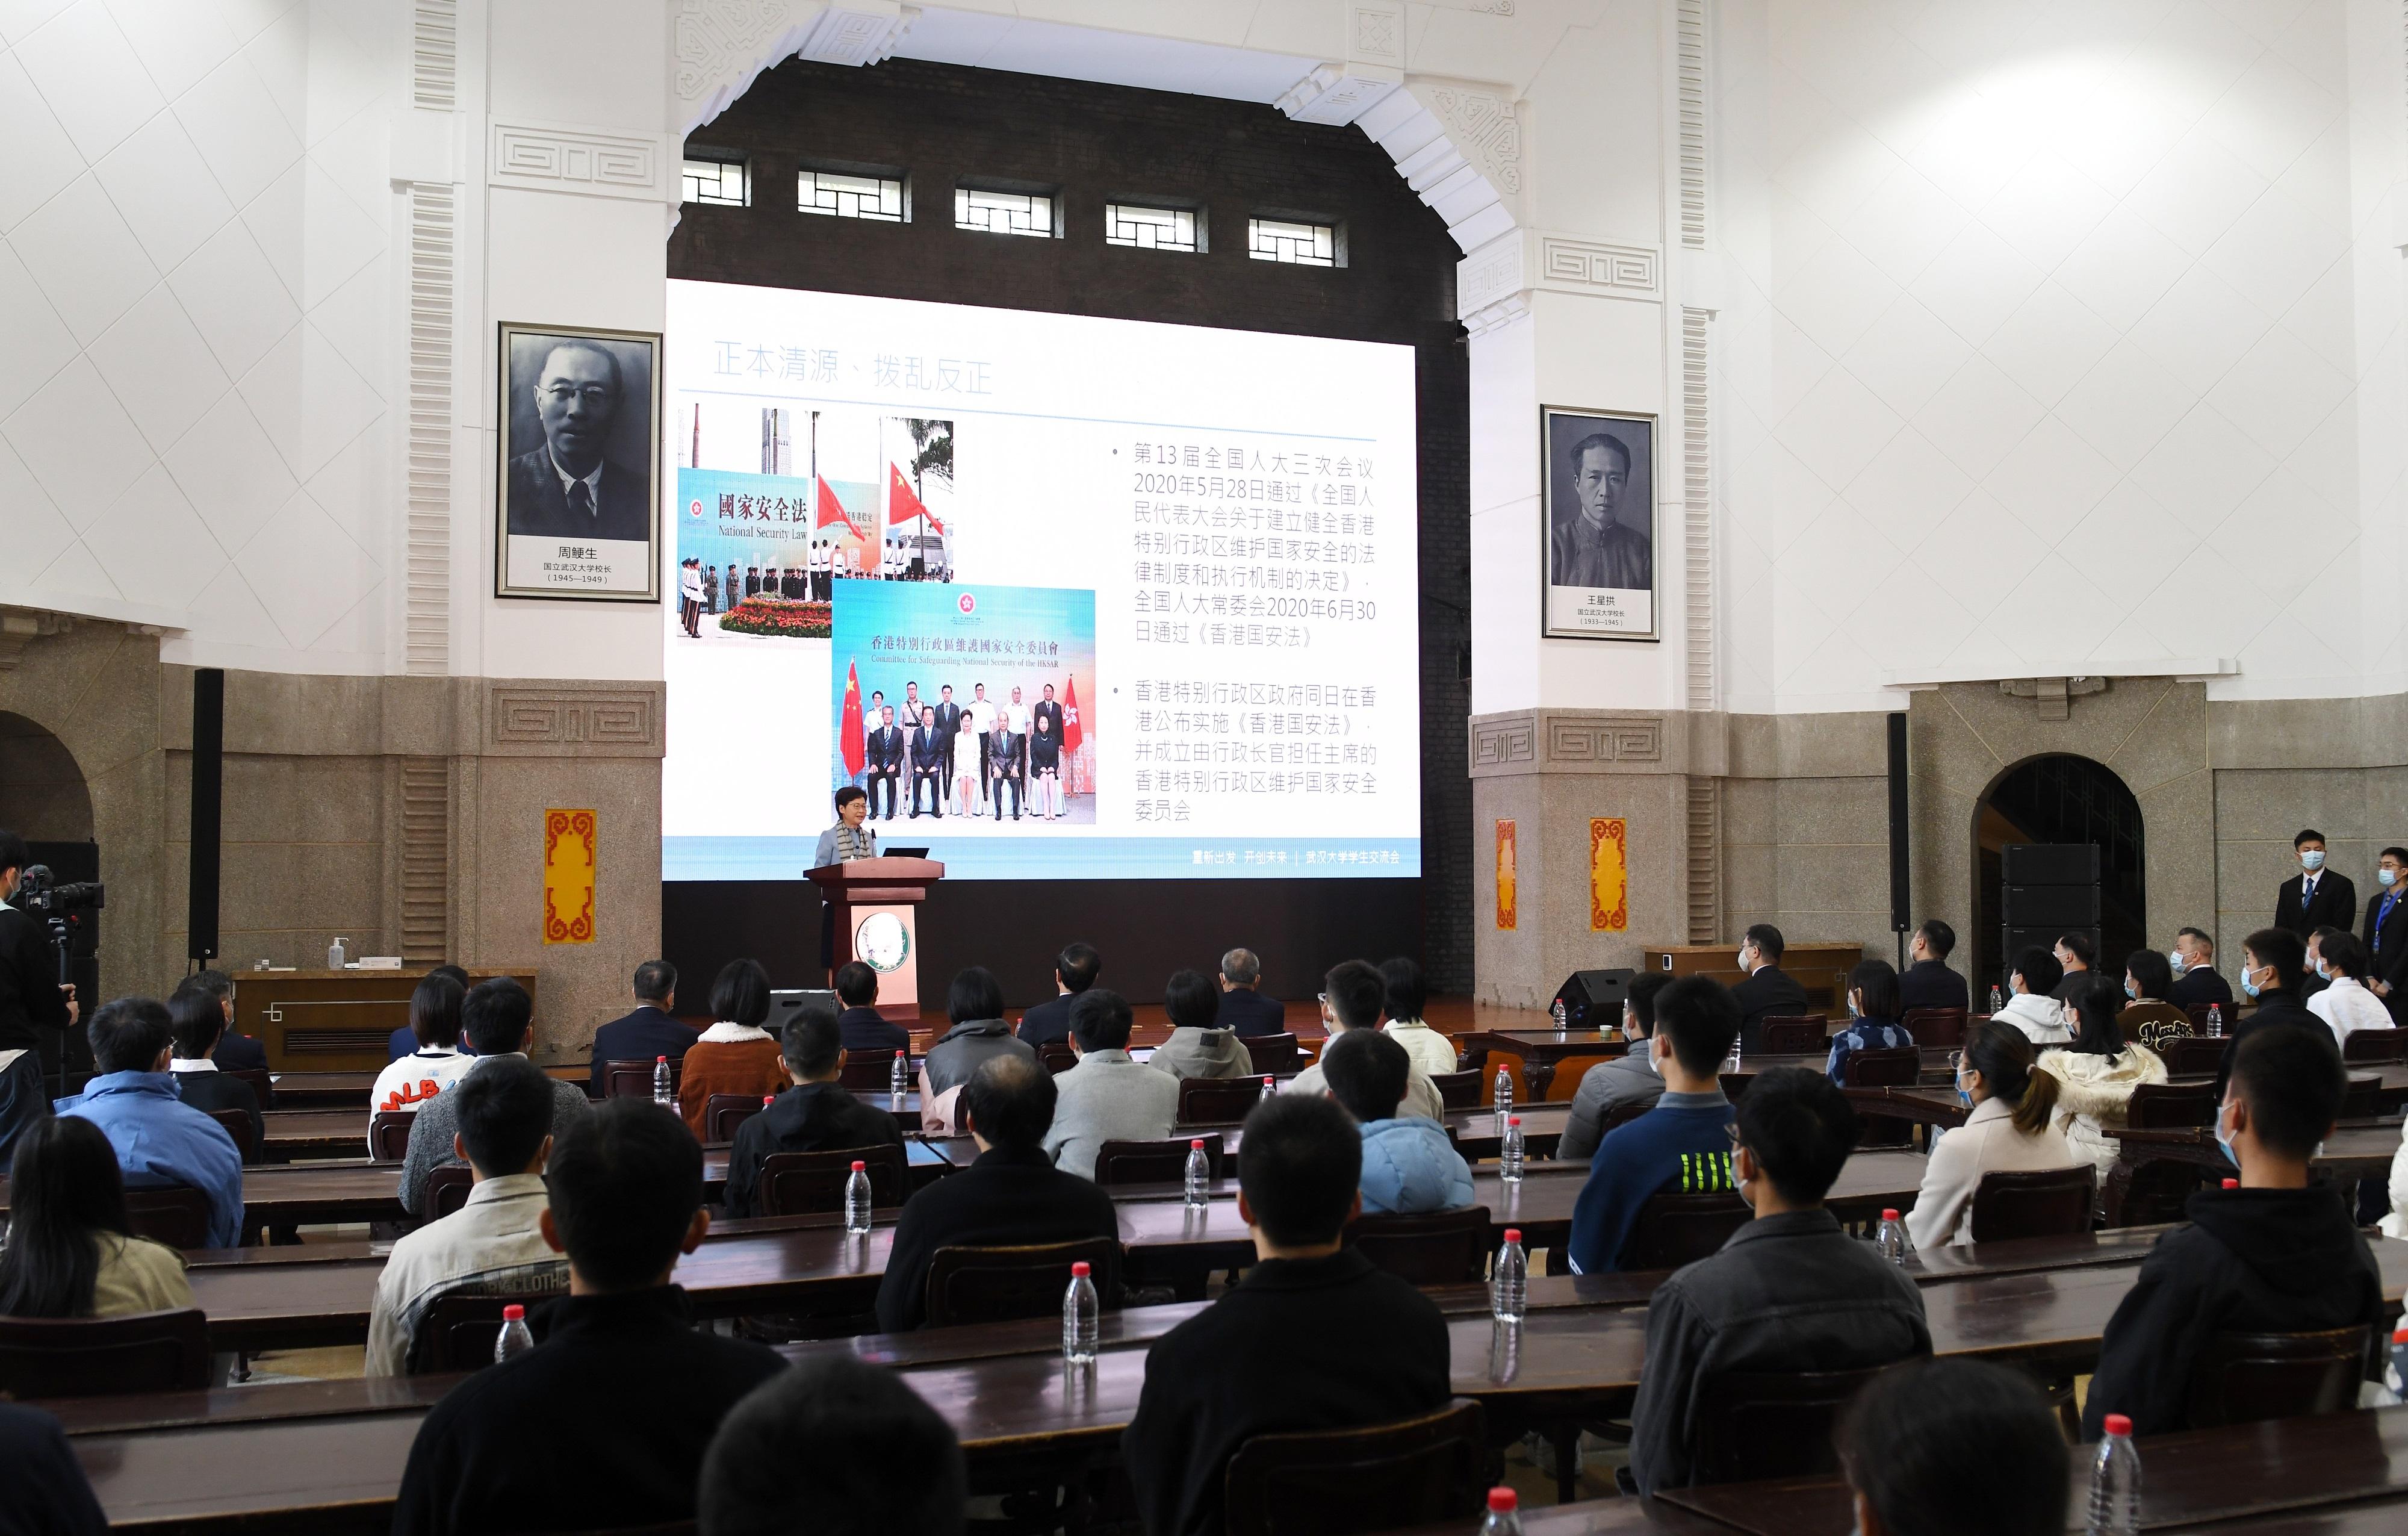 The Chief Executive, Mrs Carrie Lam, visited Wuhan University in Wuhan today (December 1). Photo shows Mrs Lam delivering a speech to students.